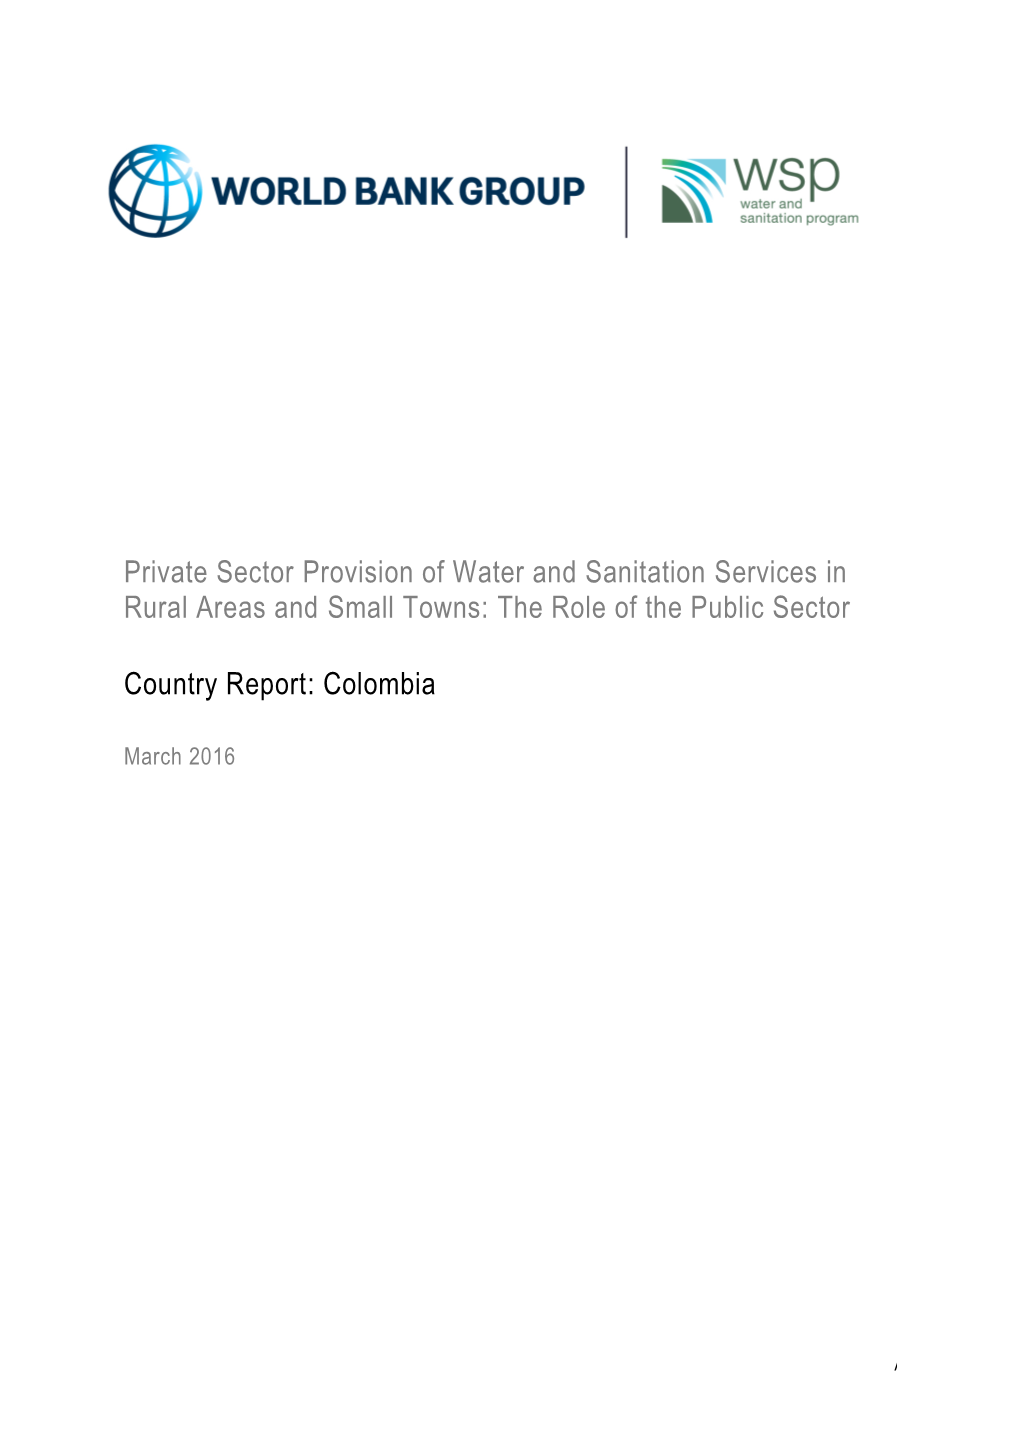 Private Sector Provision of Water and Sanitation Services in Rural Areas and Small Towns: the Role of the Public Sector